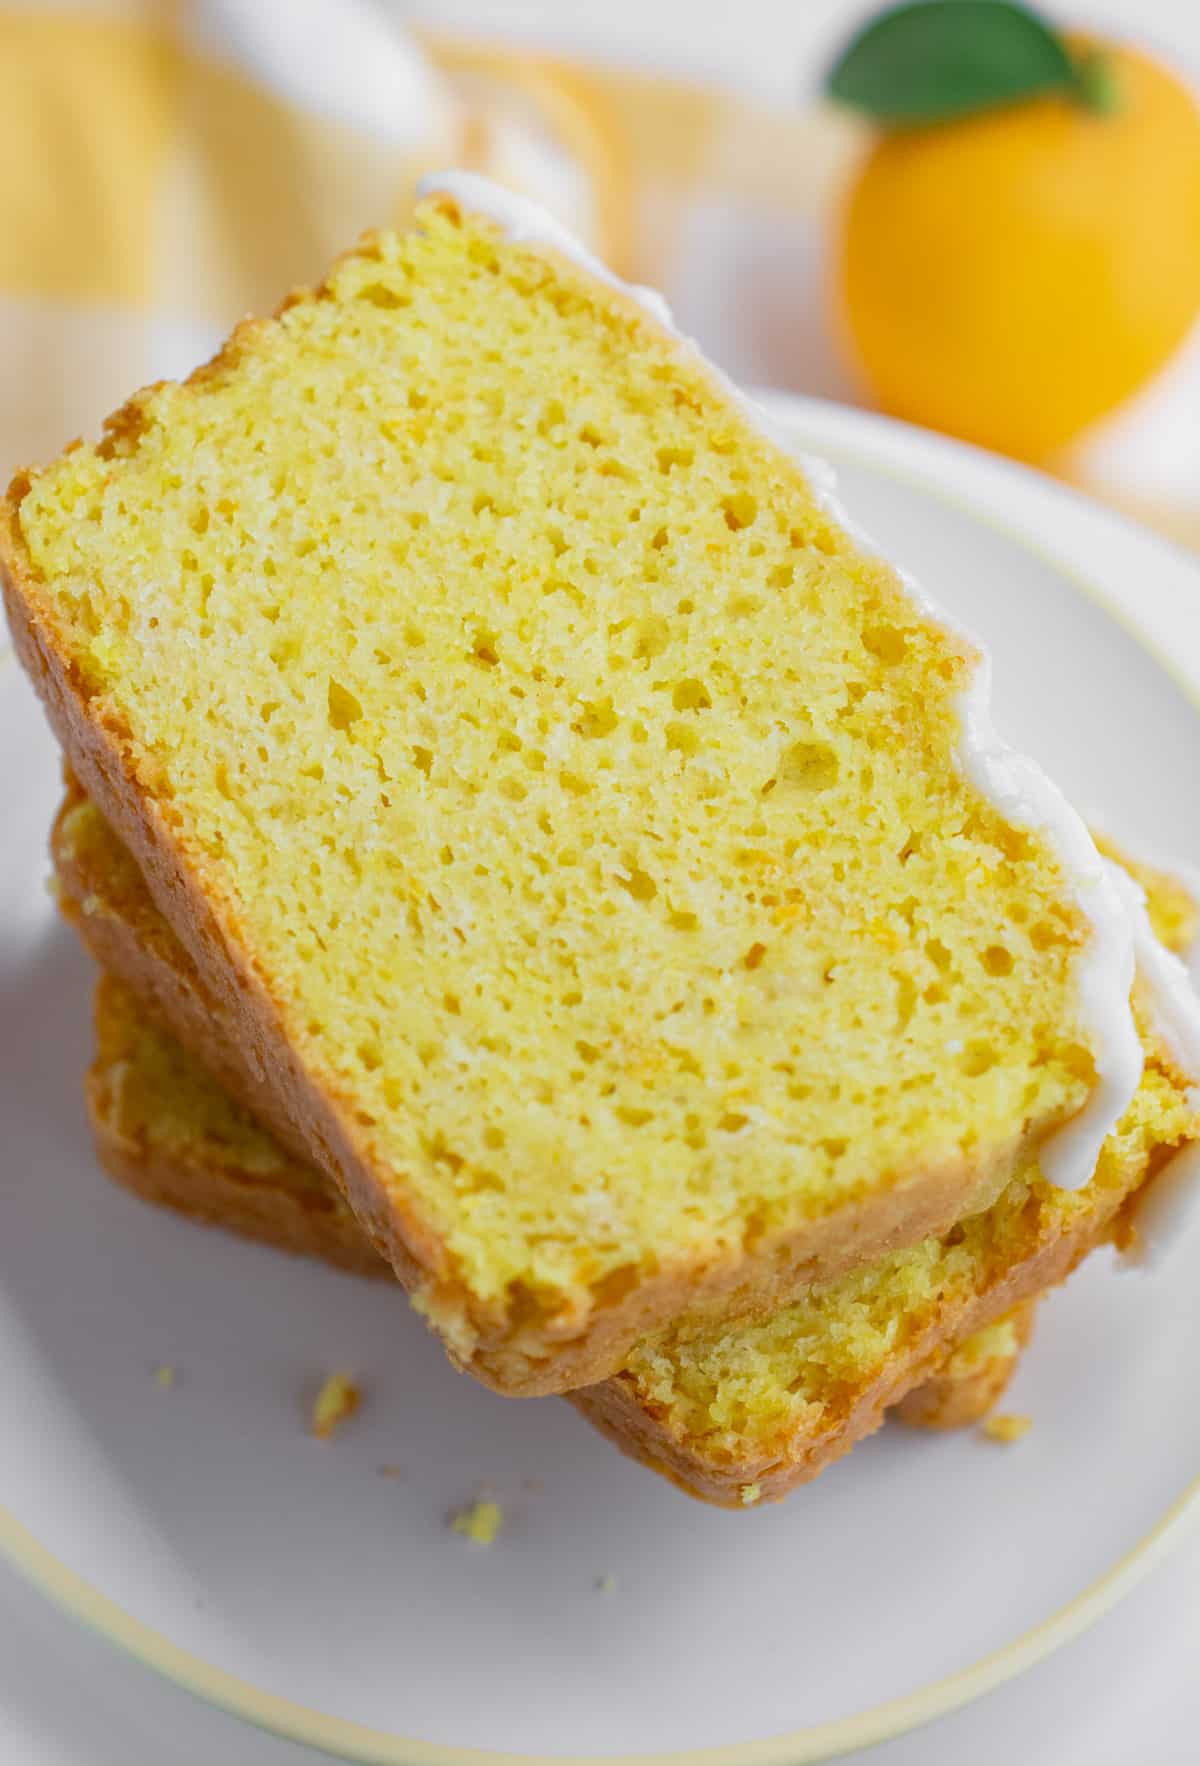 Three slices of vegan lemon bread stacked on top of each other on a white plate with a pale yellow rim.